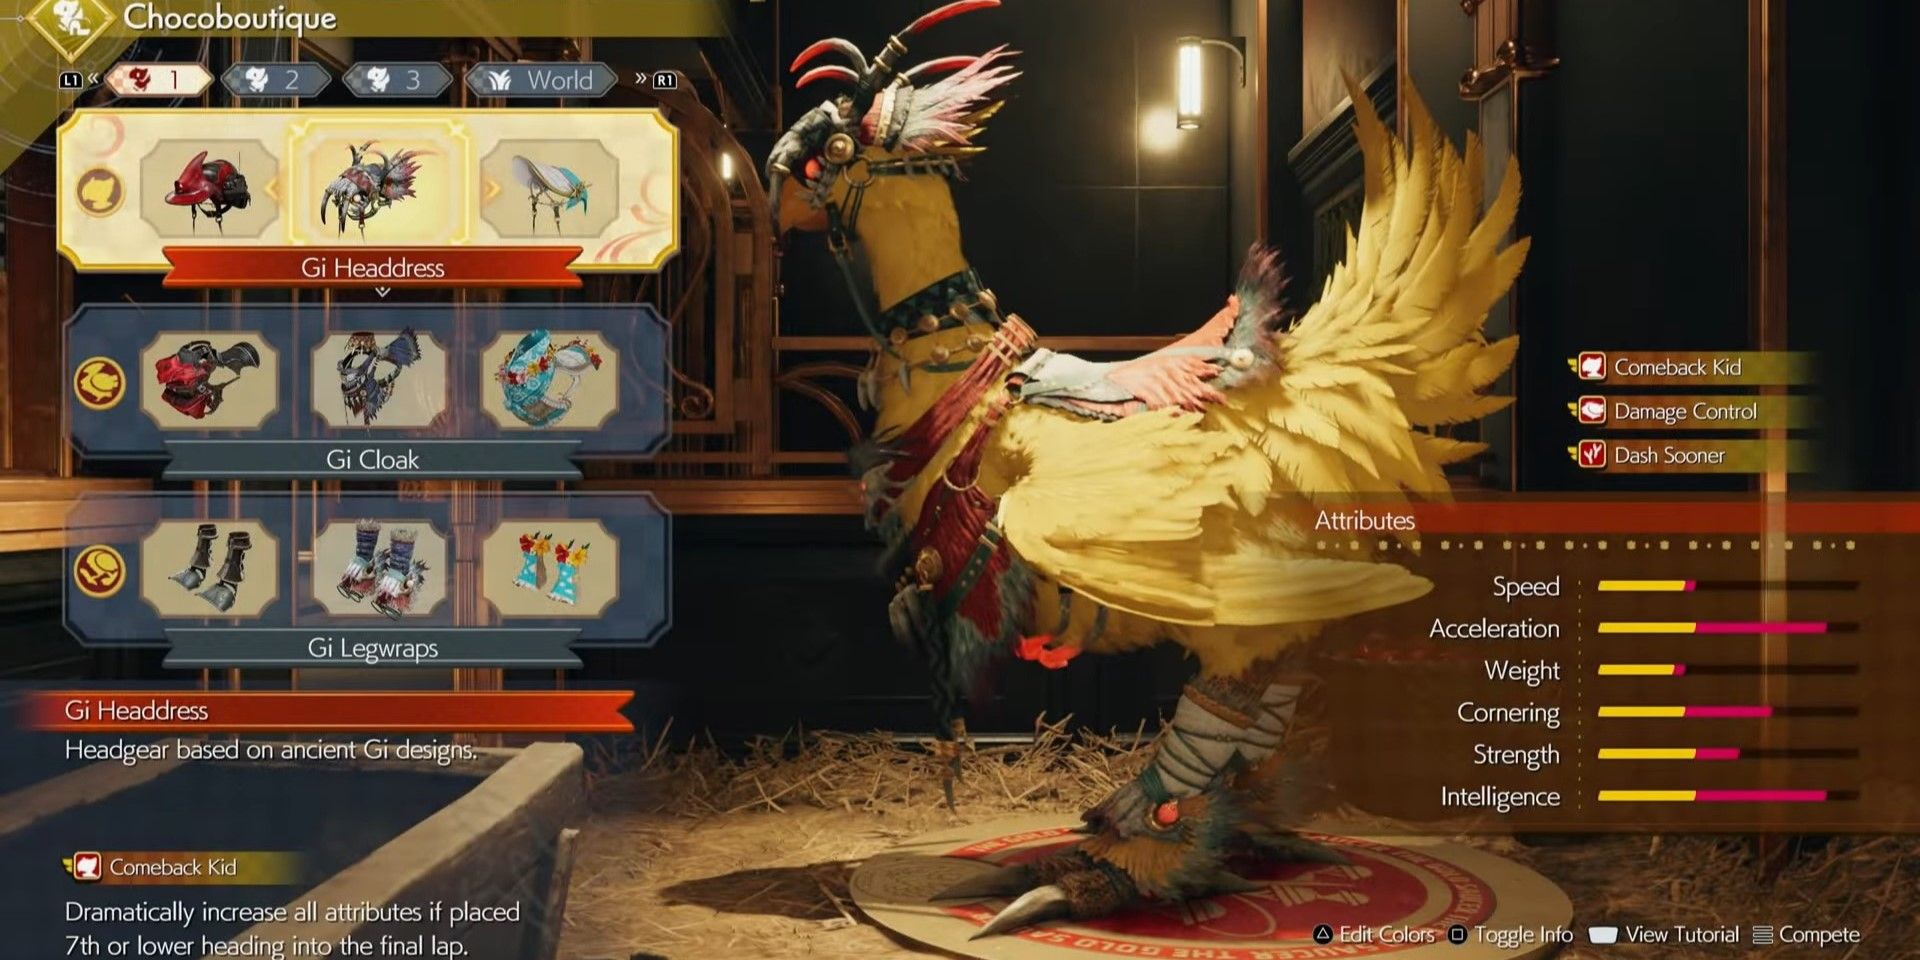 A screenshot of the Chocoboutique screen from Final Fantasy 7 Rebirth, with Piko the yellow Chocobo standing in a barn stall.